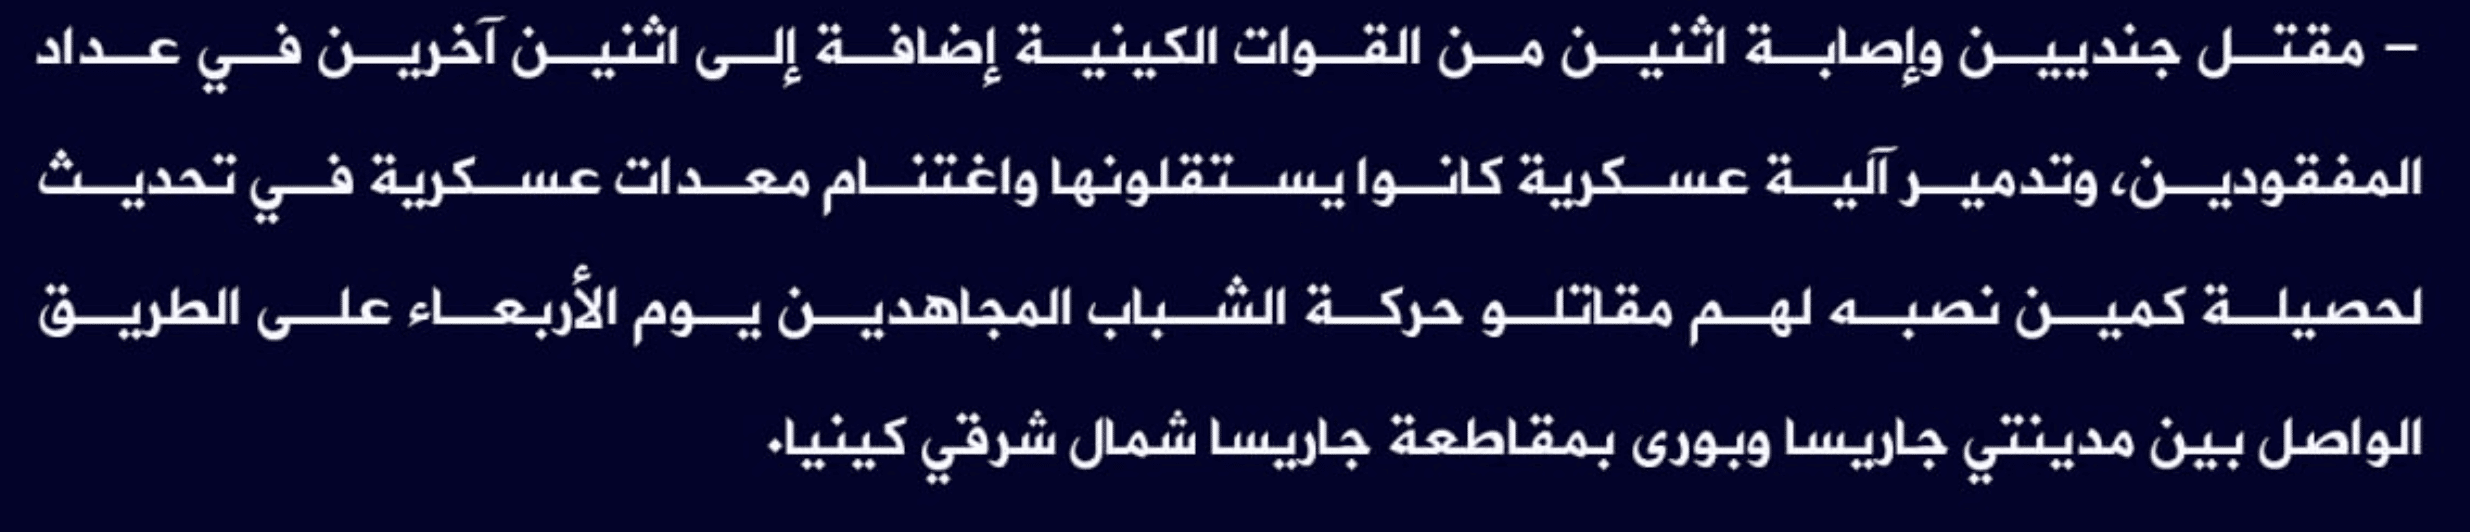 (Claim) al-Shabaab Killed Two Kenyan Forces, Injured Two Others, Two Others are Missing, Damaged a Military Vehicle, and Seized Equipment in an Ambush on the Road Between Garissa and Bori, Northeastern Kenya - 22 December 2022